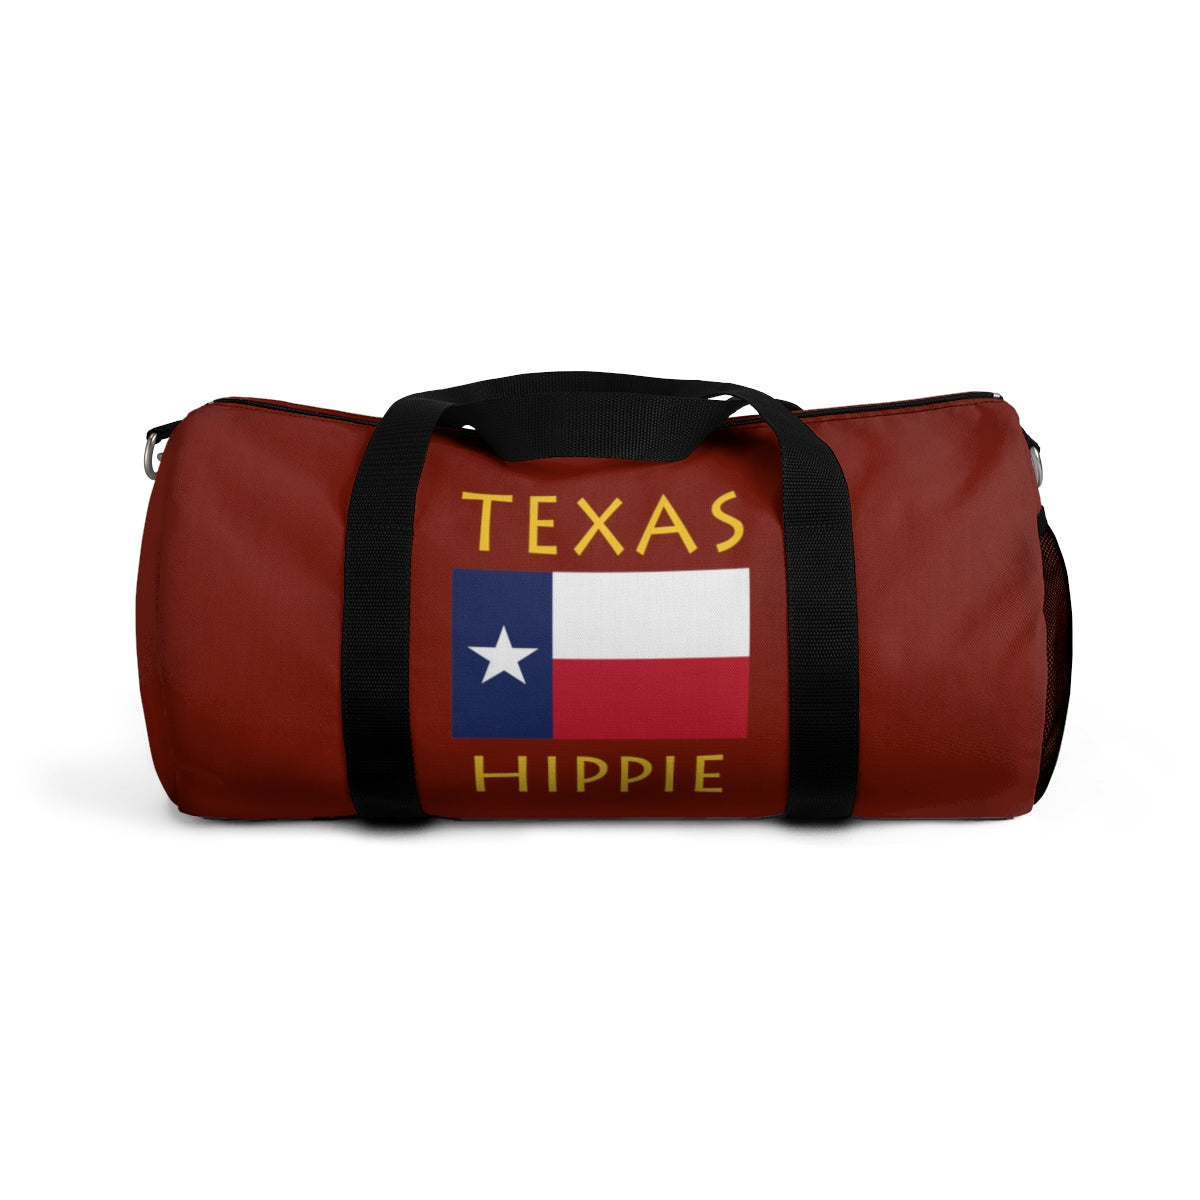 Stately Wear's Texas Flag Hippie duffel bag is colorful, iconic and stylish. We are a Katie Couric Shop partner. This duffel bag is the perfect accessory as a beach bag, ski bag, travel bag, shopping bag & gym bag, Pilates bag or yoga bag. Custom made one-at-a-time with environmentally friendly biodegradable inks & dyes. 2 sizes to choose. Stately Wear's bags are very durable, soft and colorful duffels with durable straps.